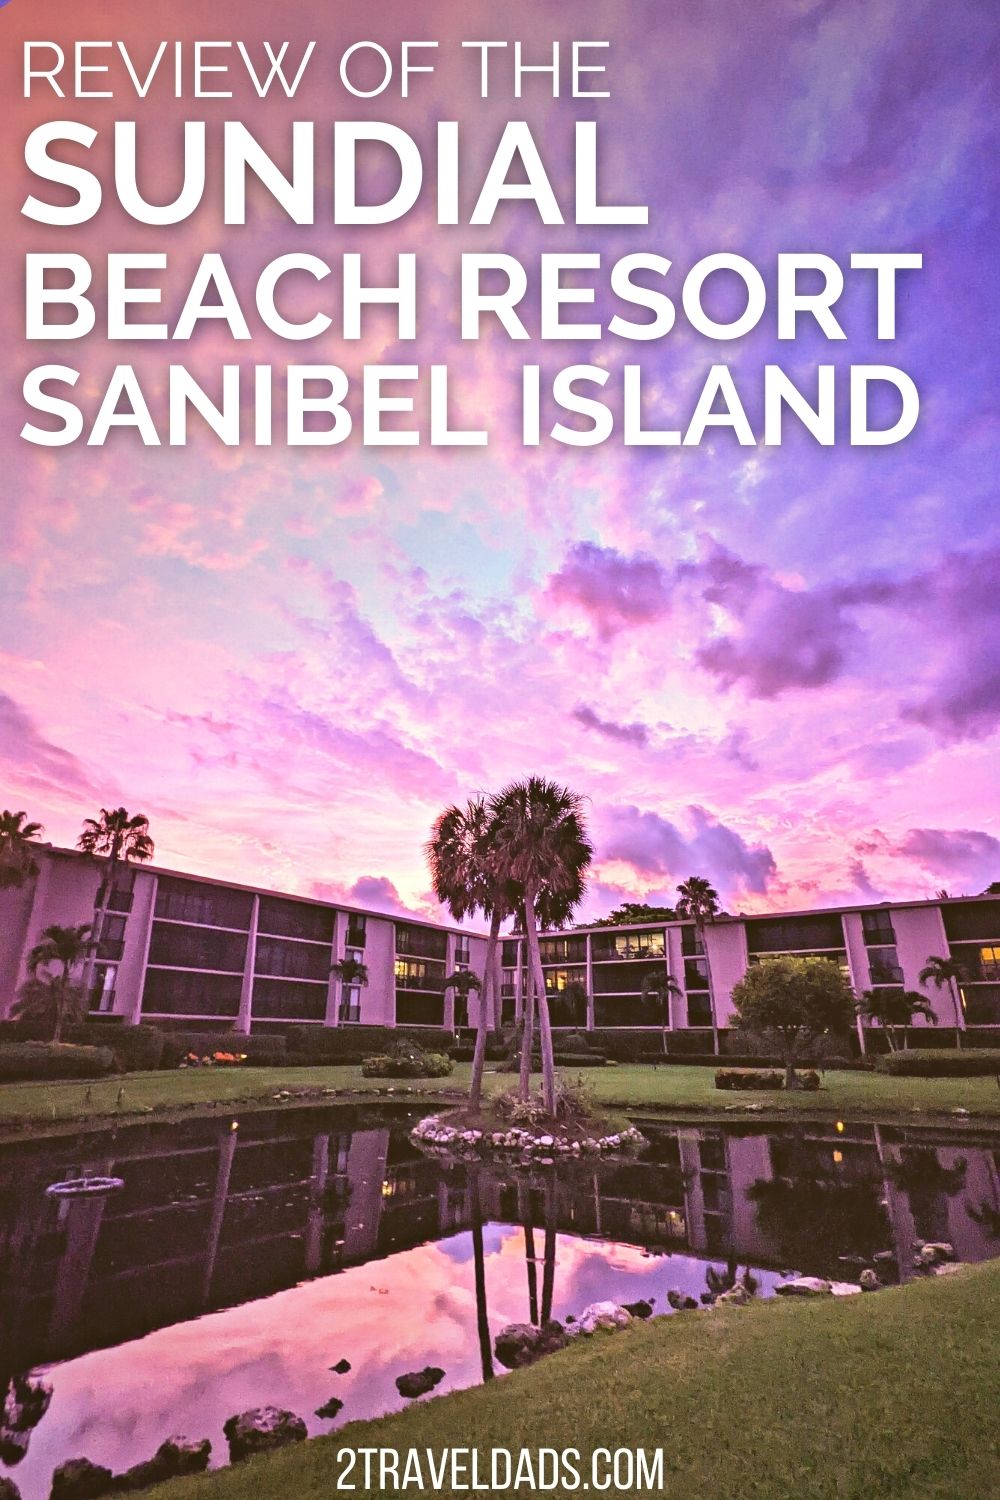 The Sundial Beach Resort on Sanibel Island is great for families looking for a spacious beachfront hotel on the Florida Gulf Coast. Review of the hotel, amenities and ideas for things to do on Sanibel Island.